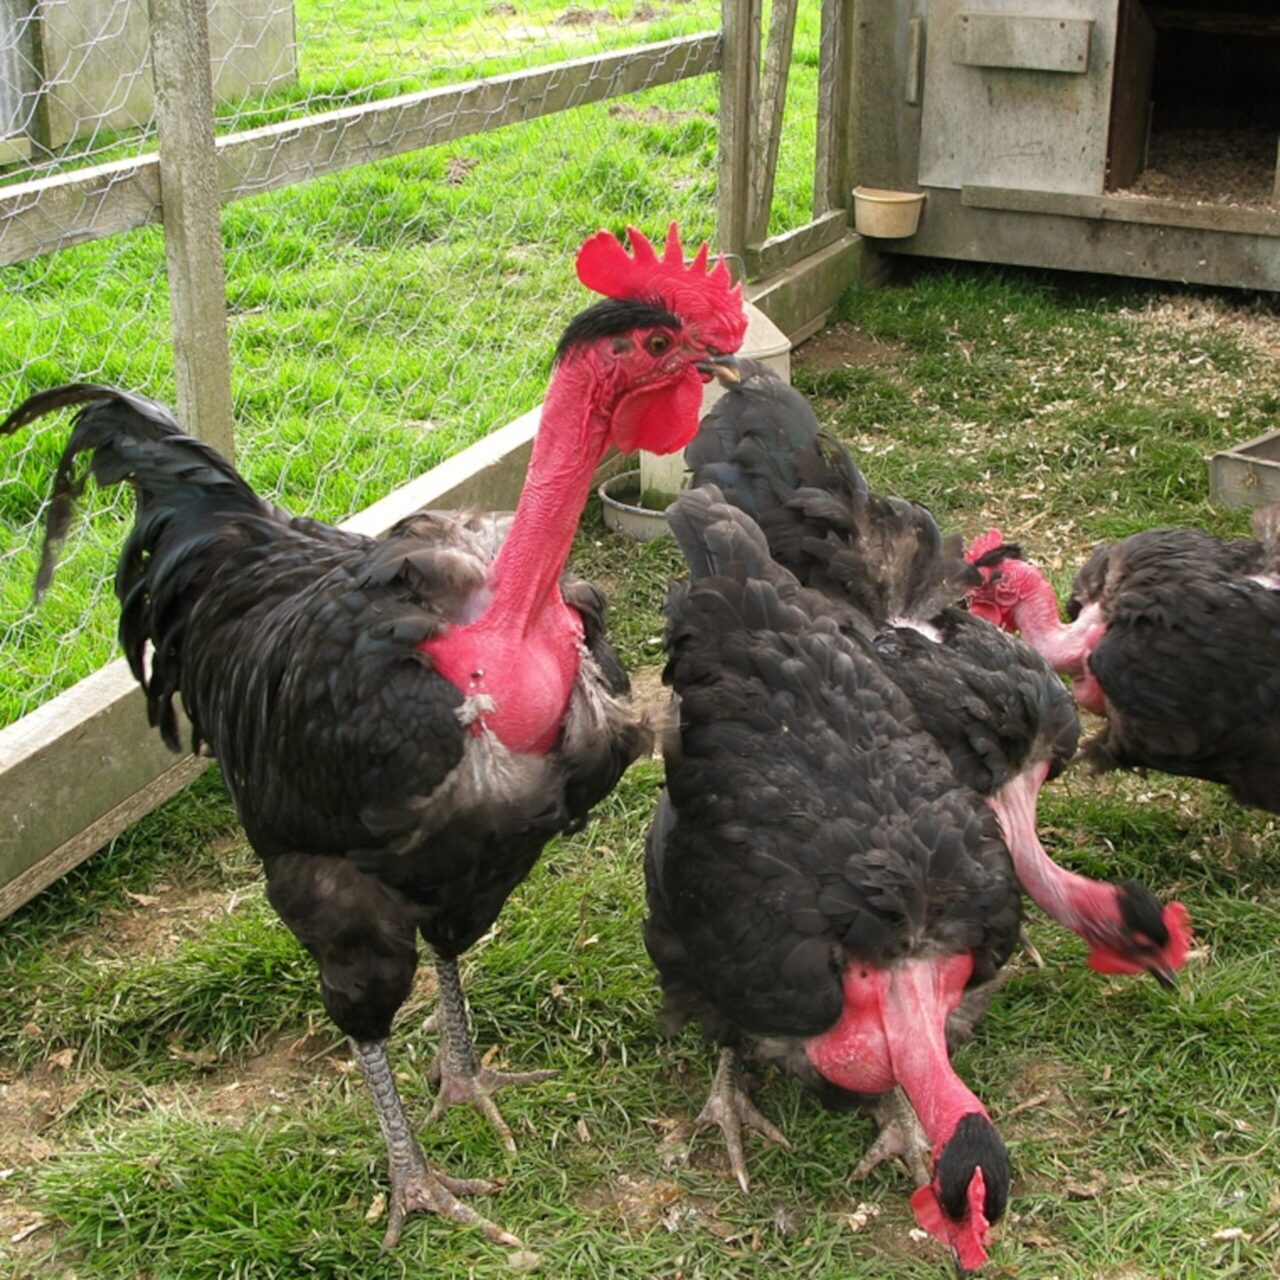 Chickens without plumage on the neck